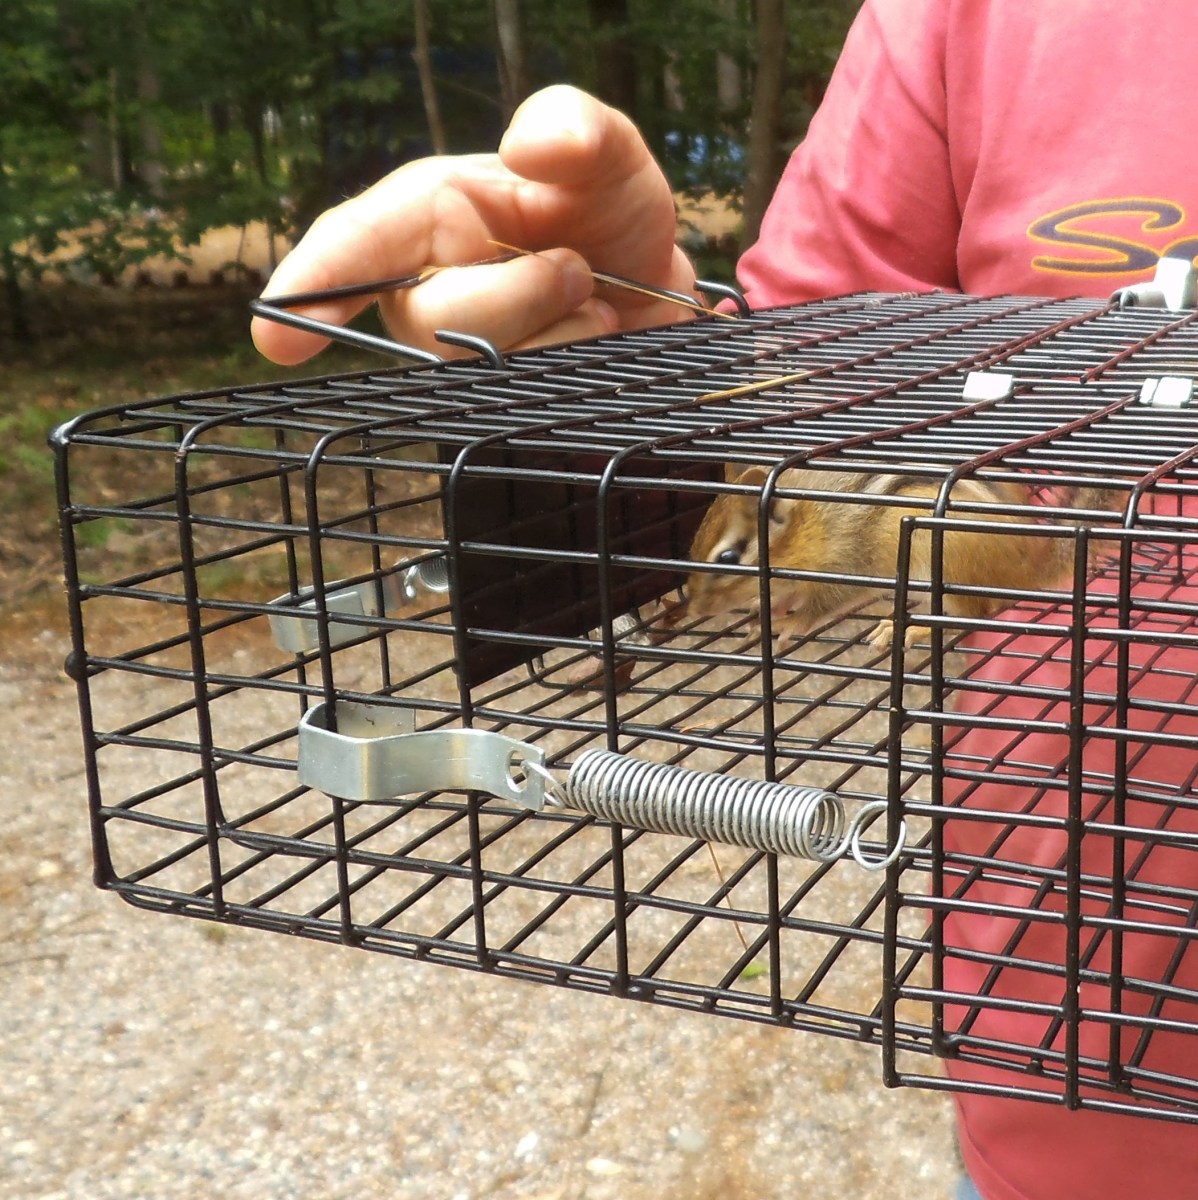 Captured chipmunk is ready to move to a new territory.